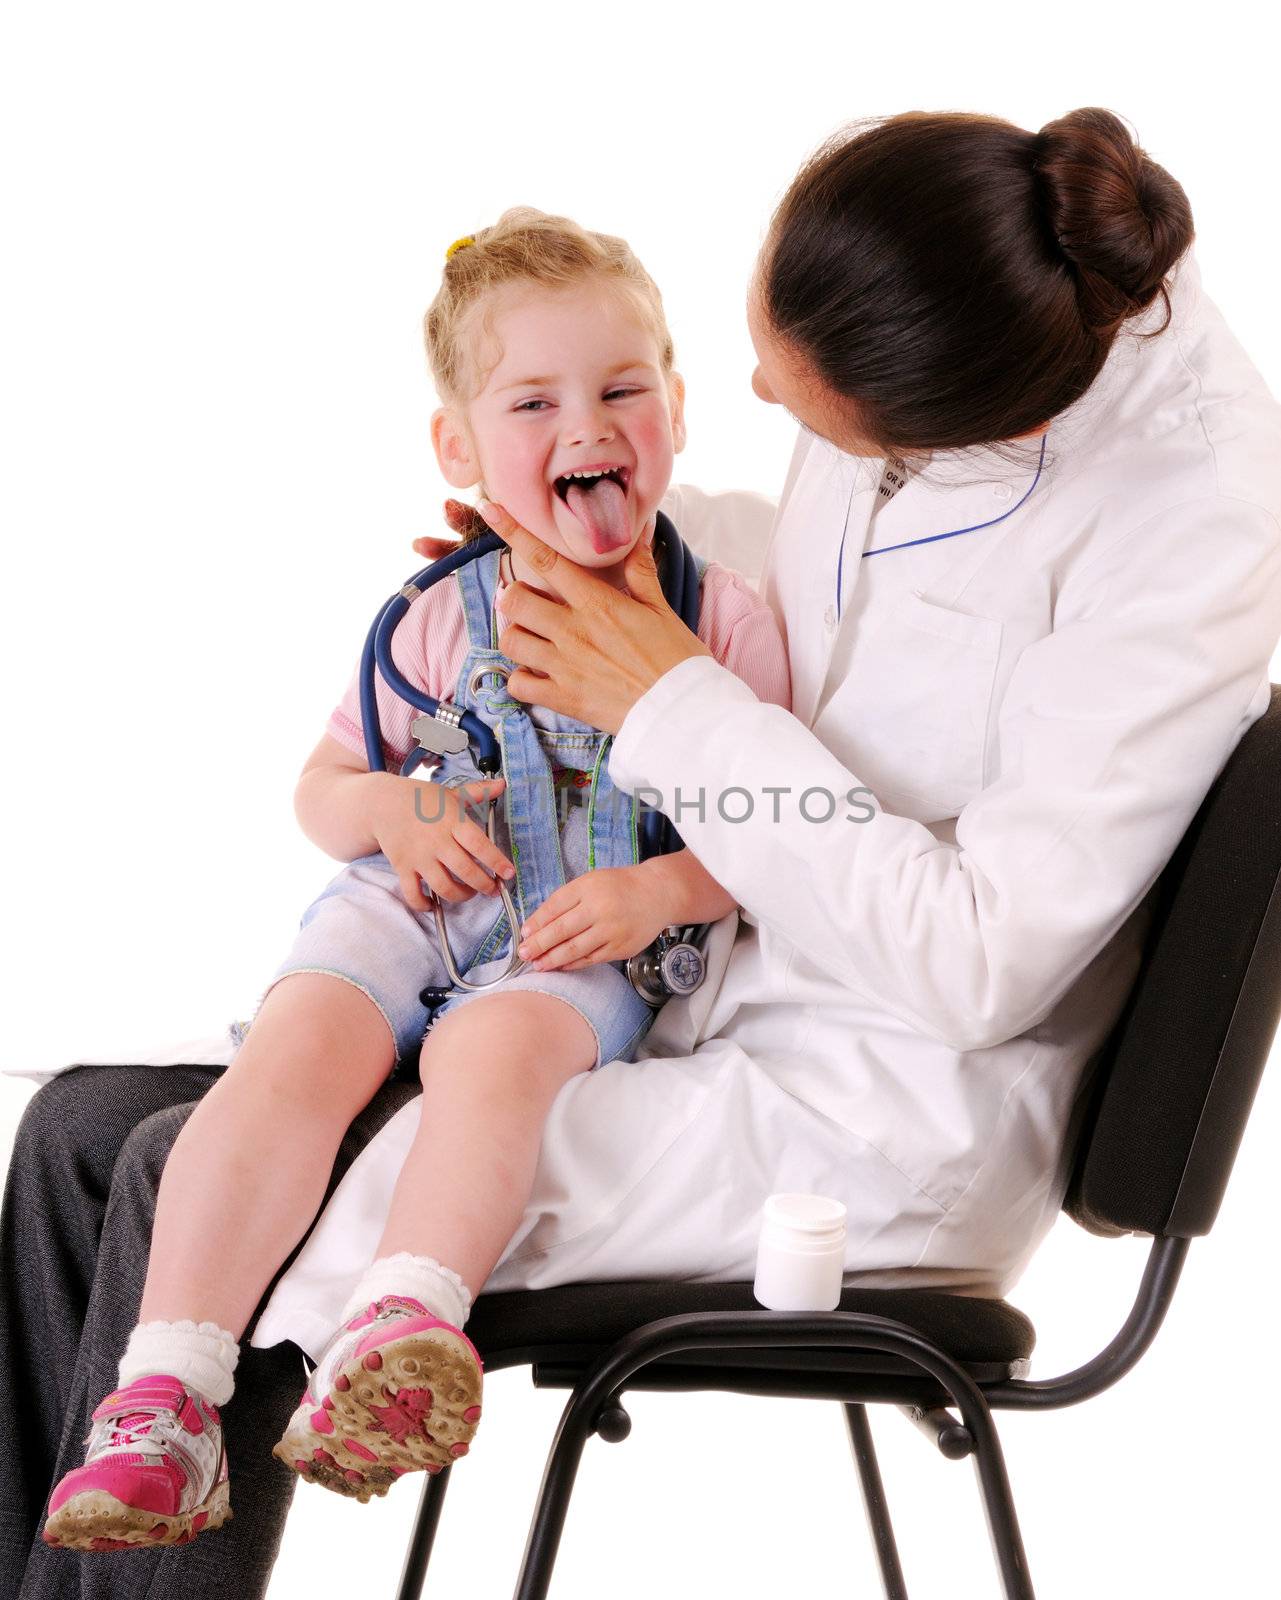 Pediatrician and small blonde girl: throat checking isolated on white background